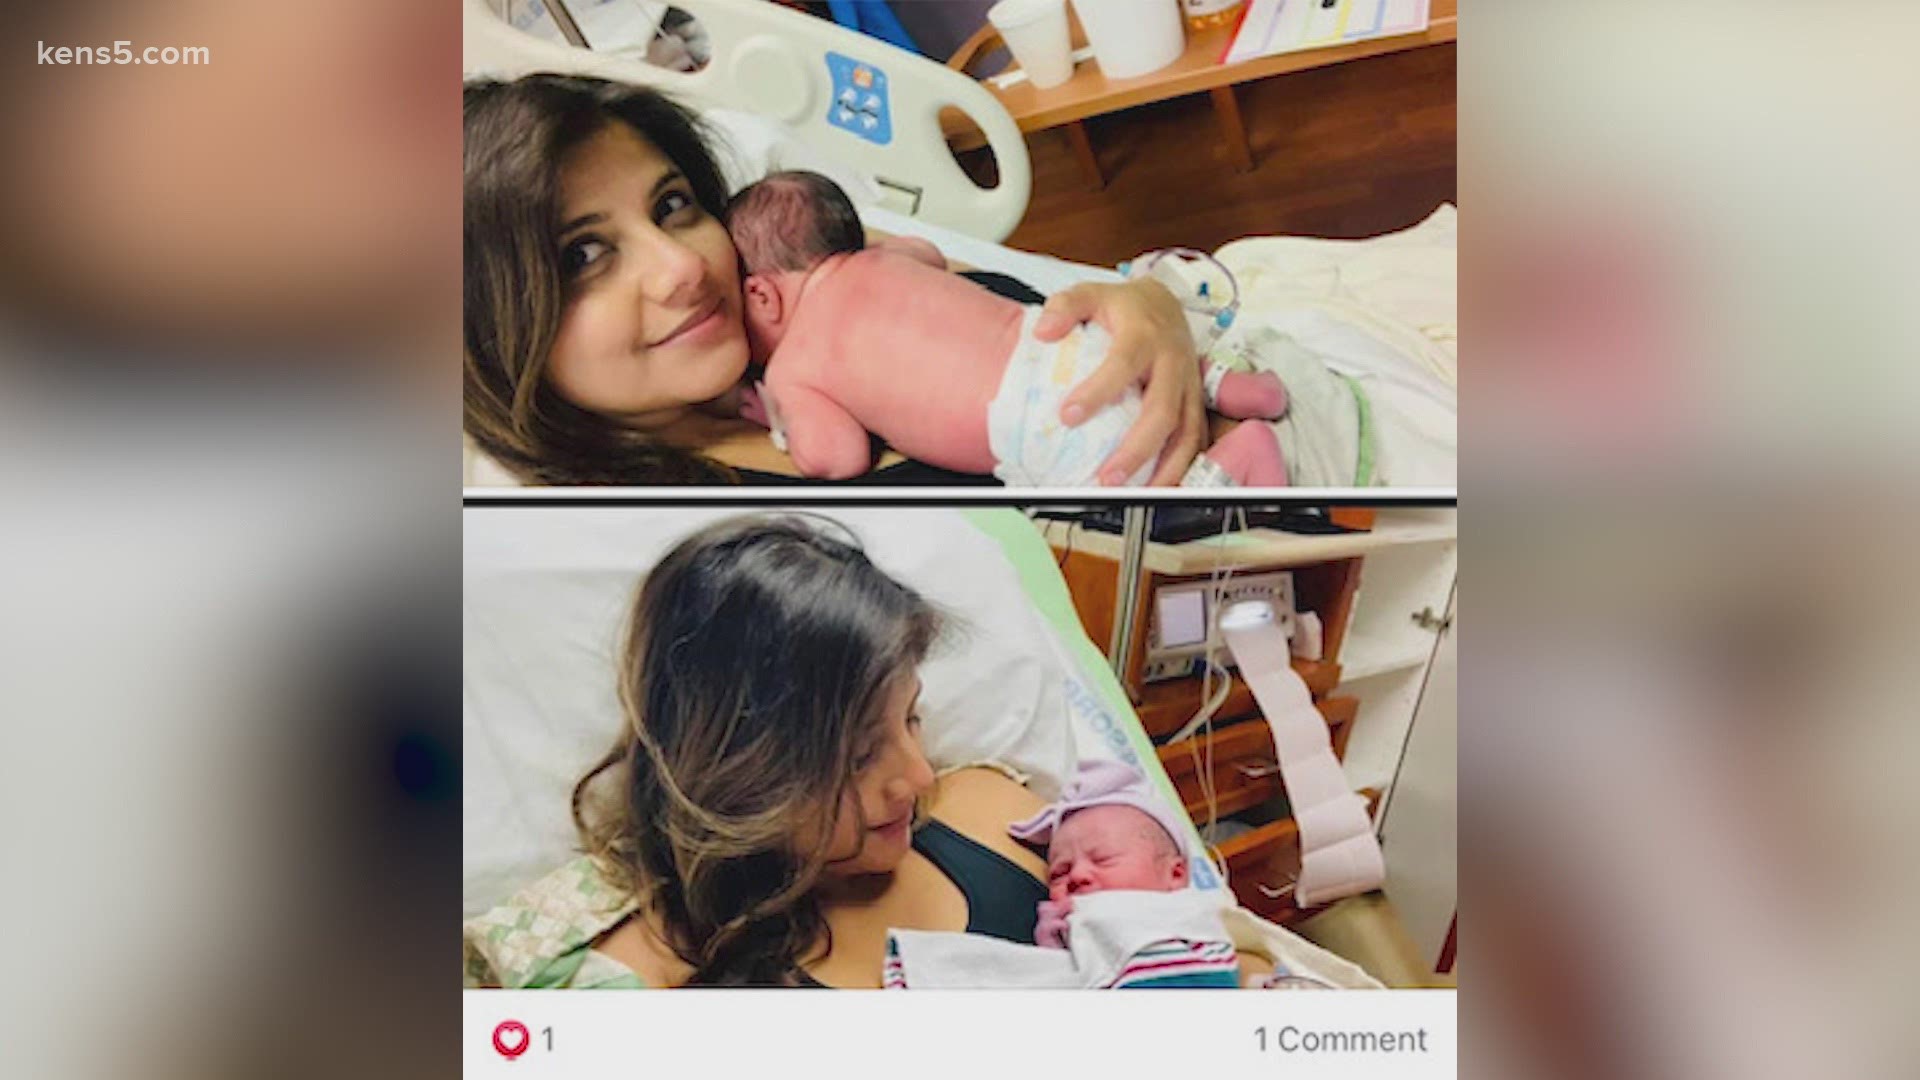 The KENS 5 morning anchor gave birth to her beautiful baby girl Saturday!